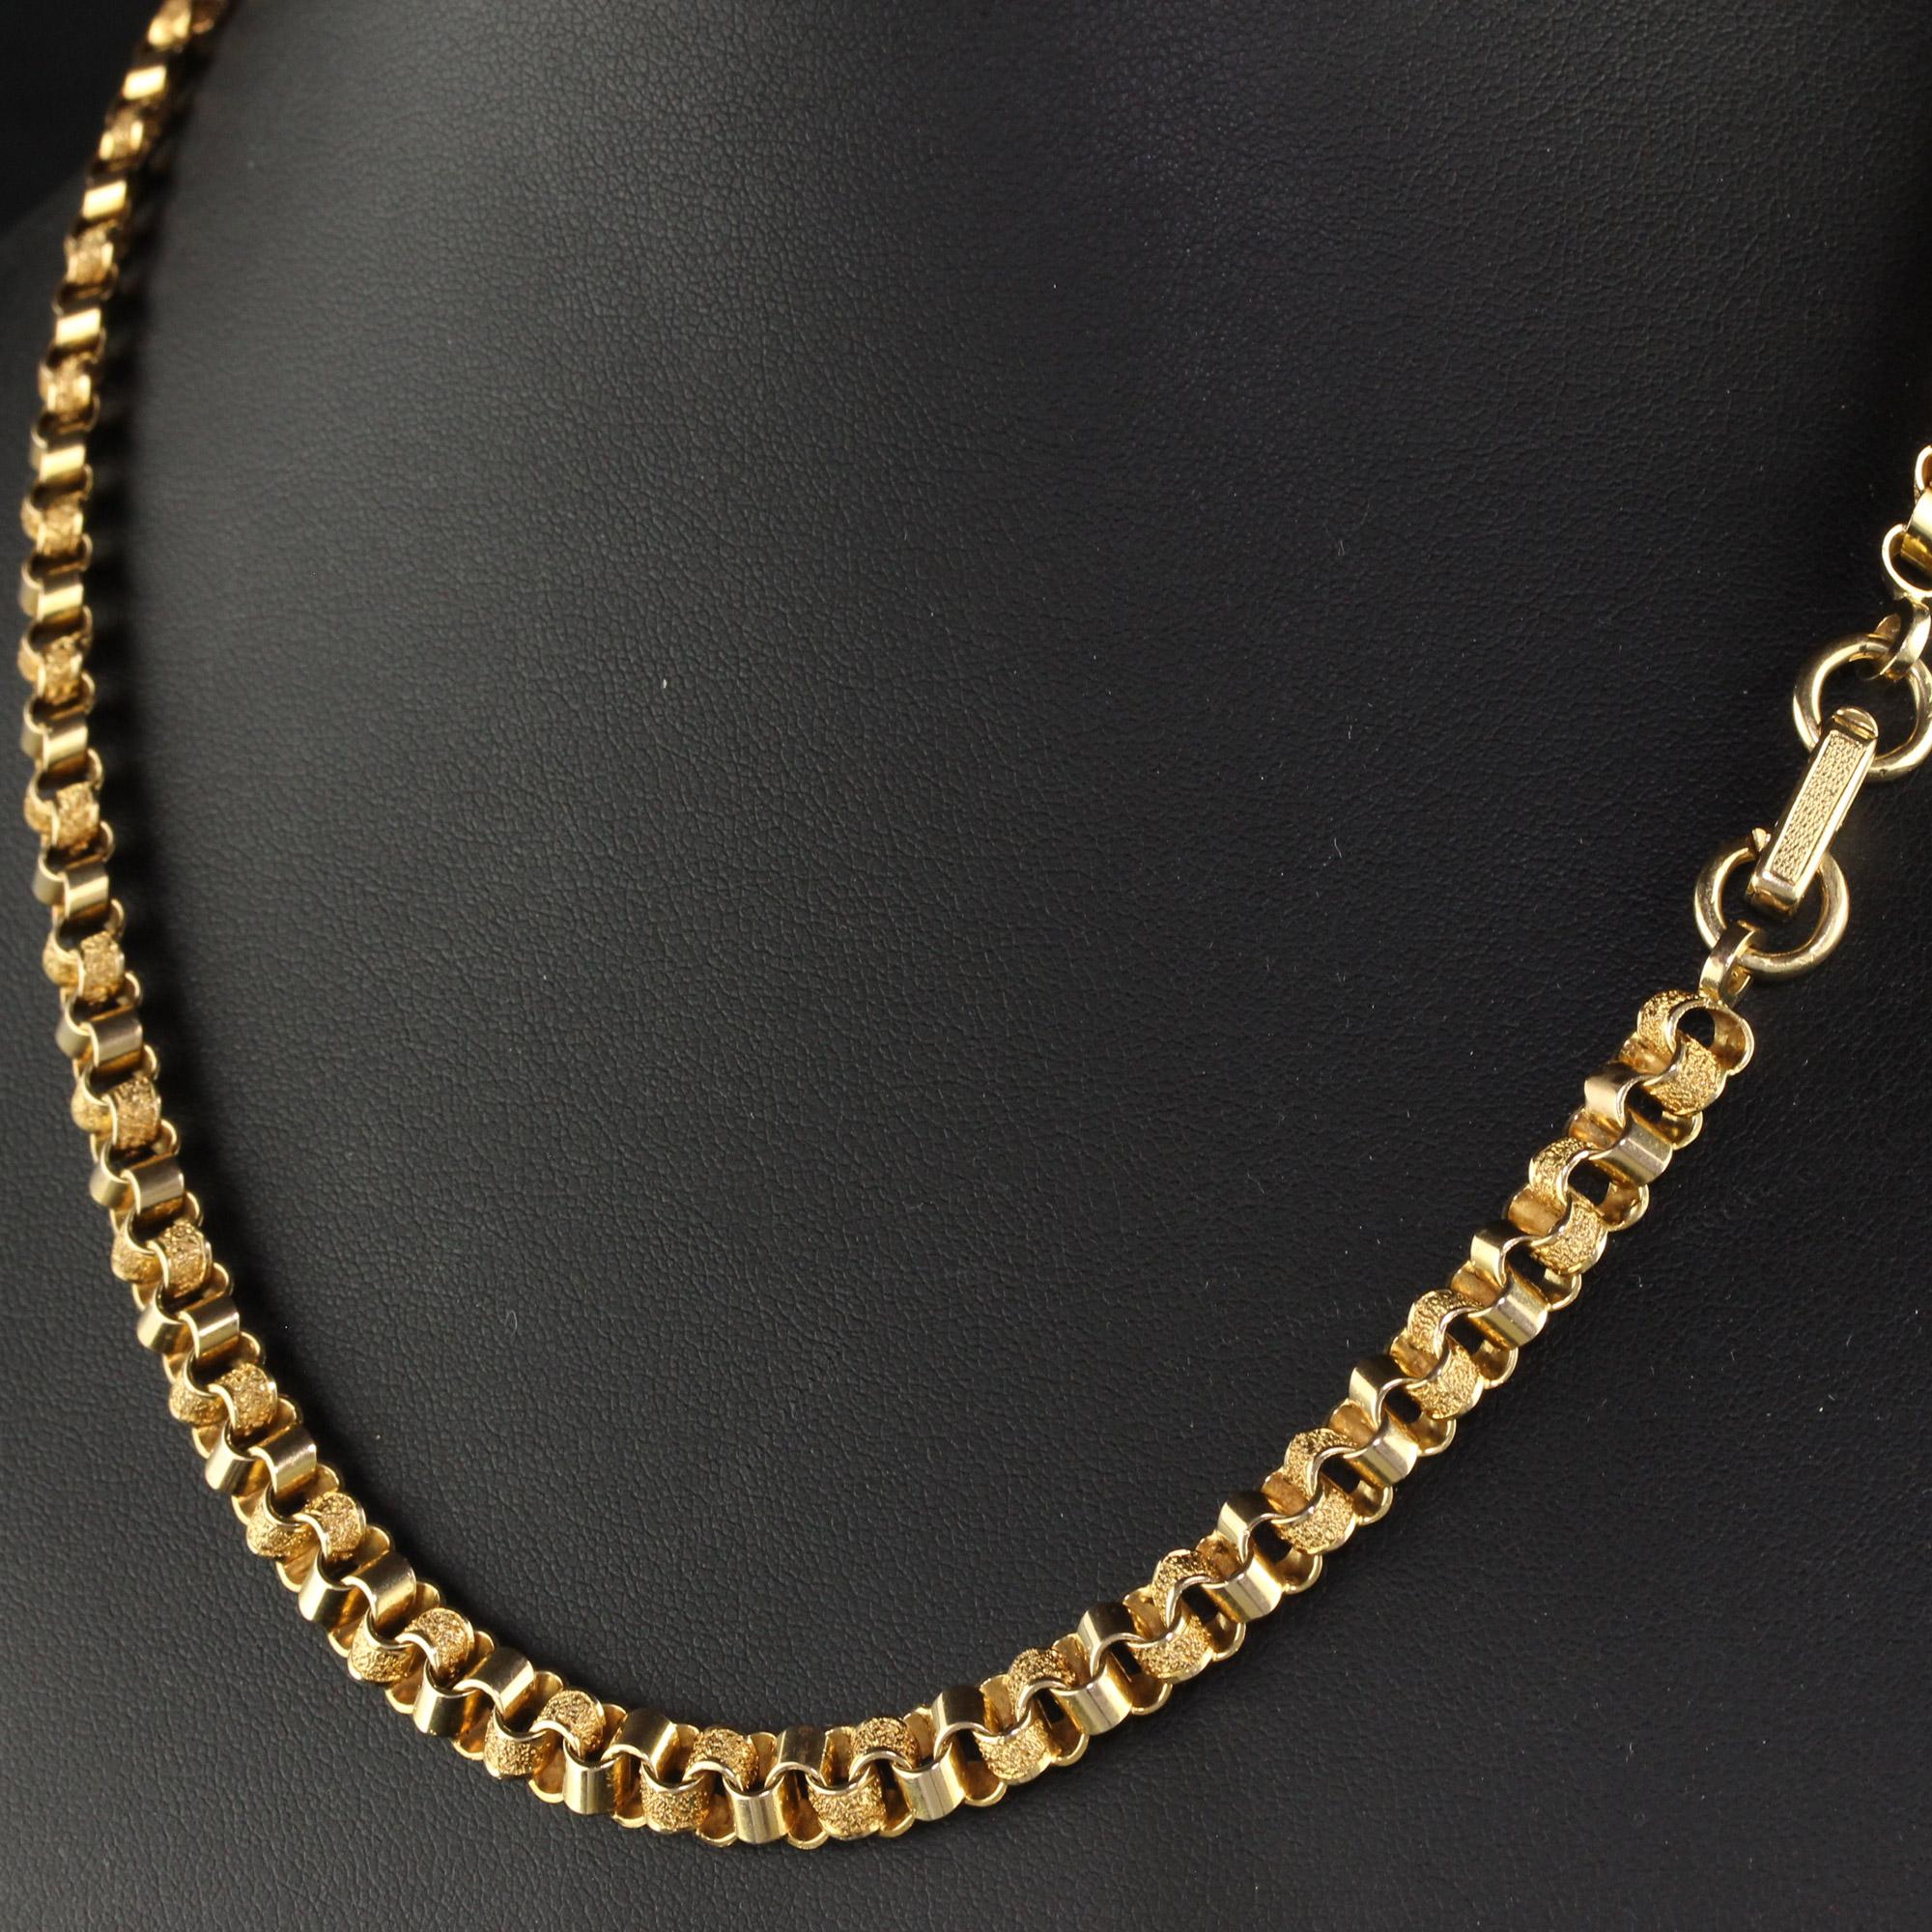 Antique Art Deco 14K Yellow Gold Flat Geometric Link Chain Necklace For Sale 2